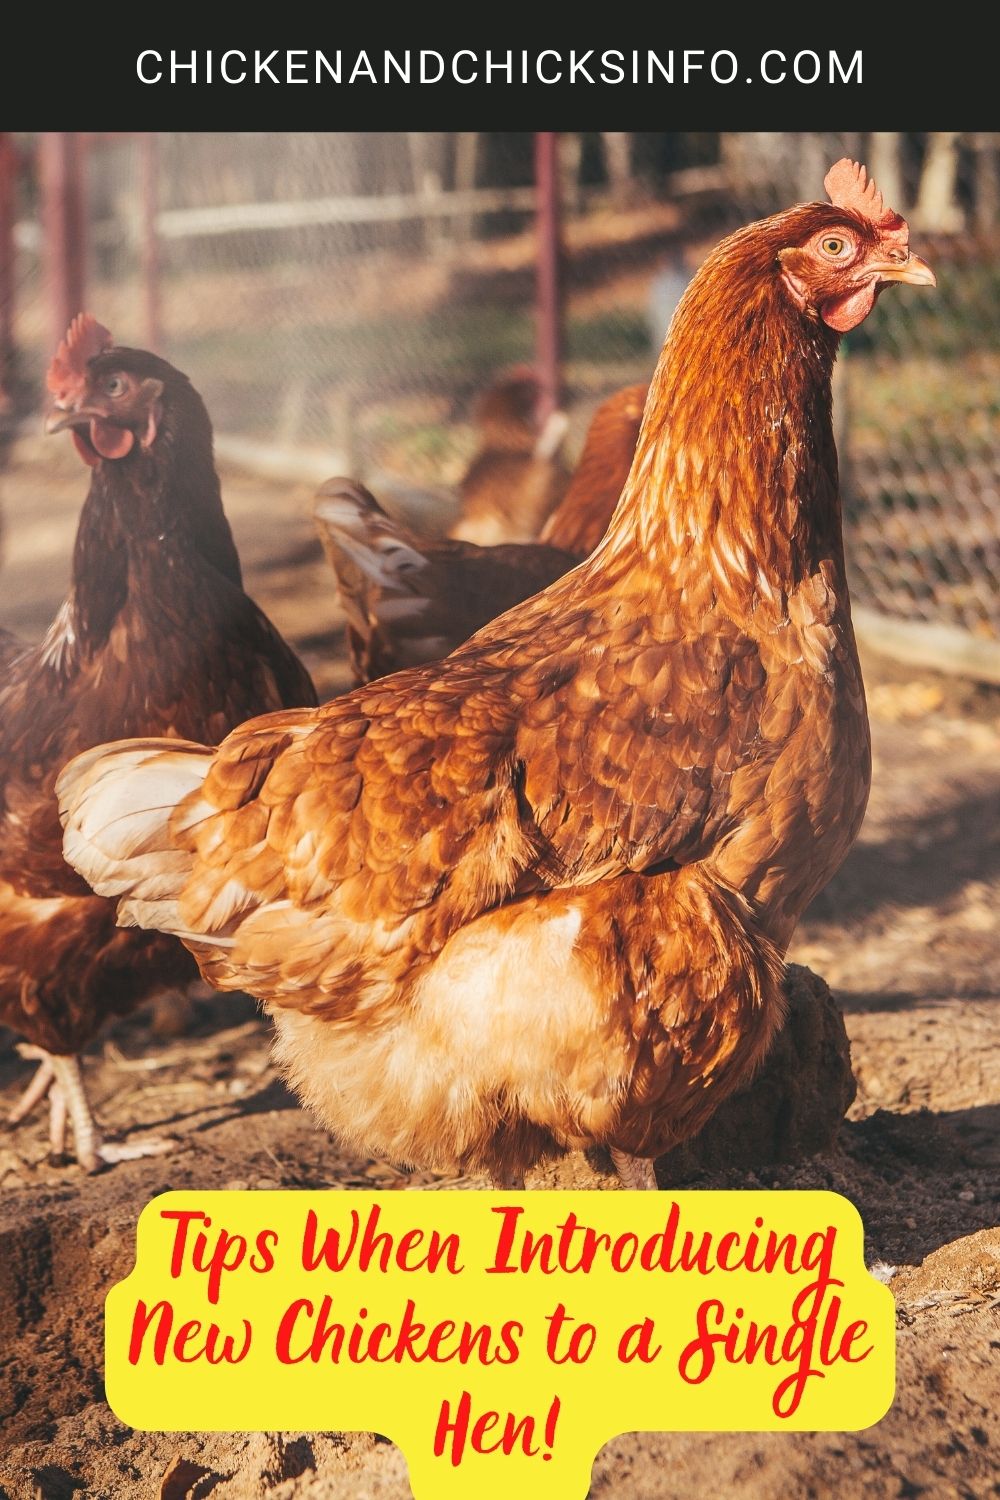 Tips When Introducing New Chickens to a Single Hen! poster.
